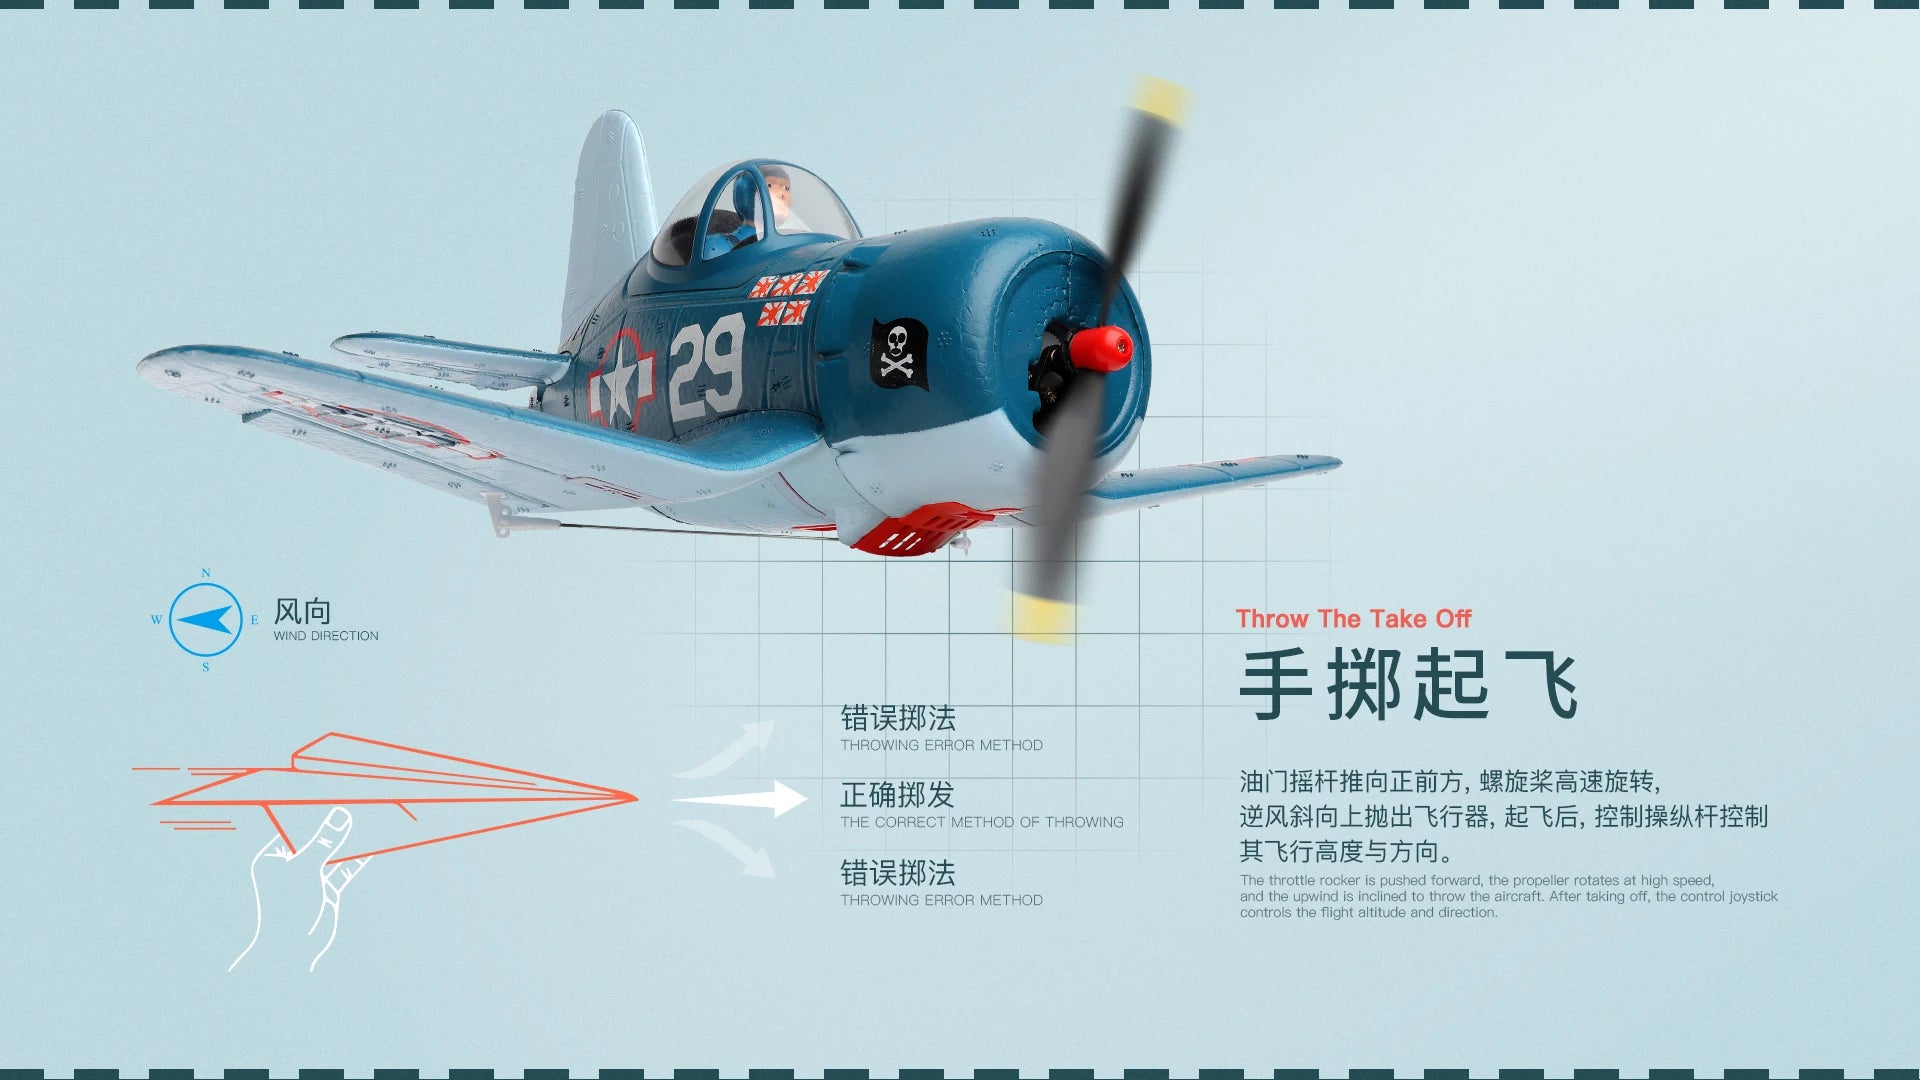 WLtoys XK A500  A250 RC Plane, the throttle rocker is pushed forward, the propeller rotates at high speed .